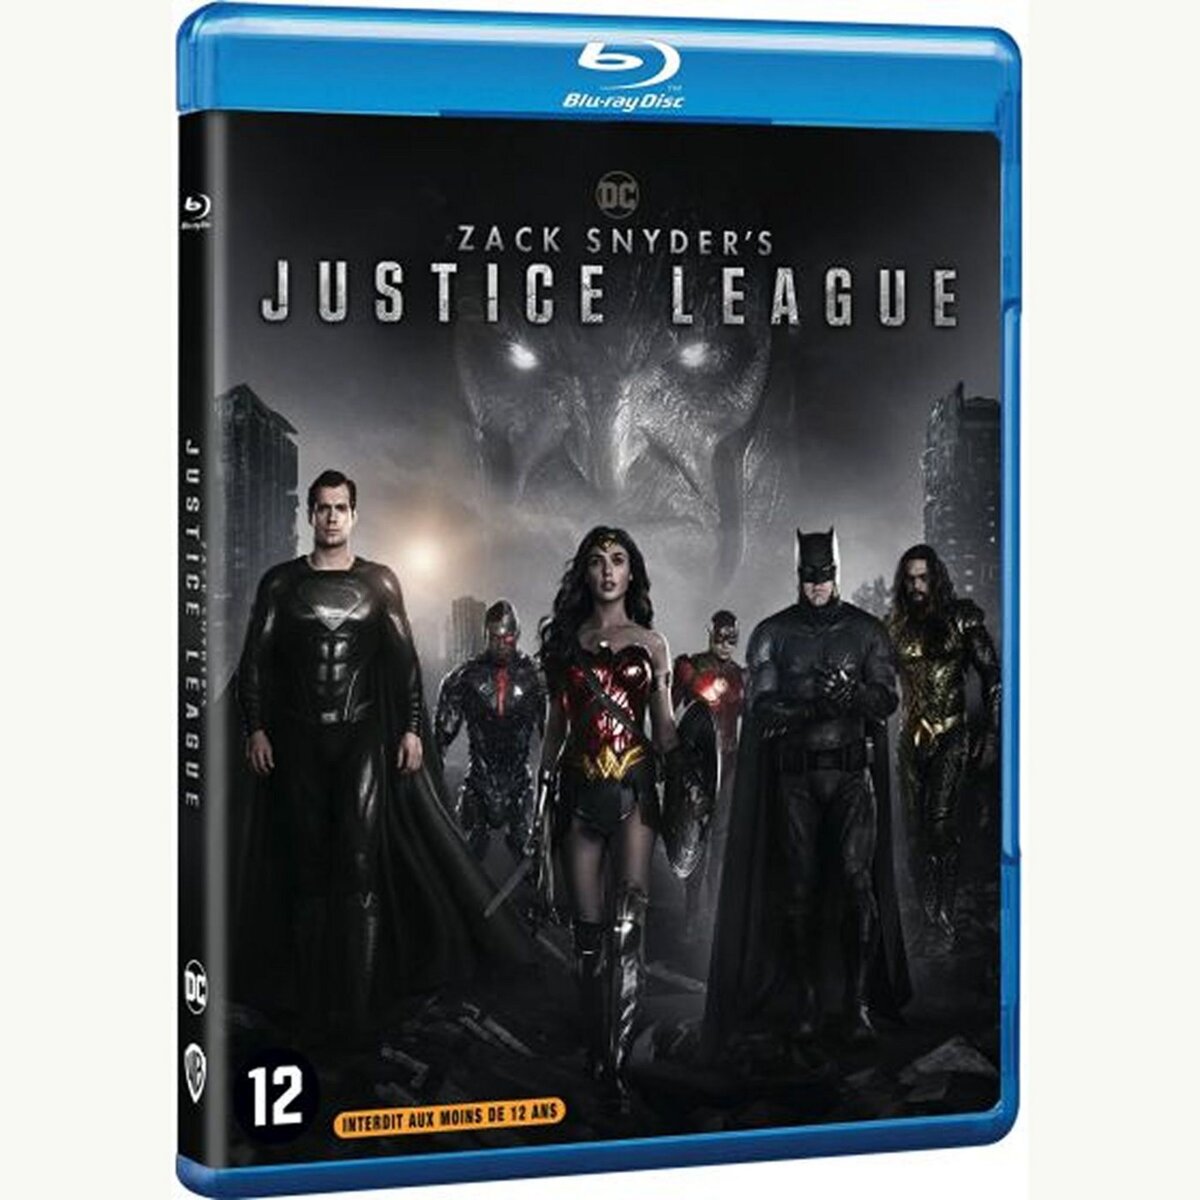 Zack Snyder's Justice League BLU-RAY